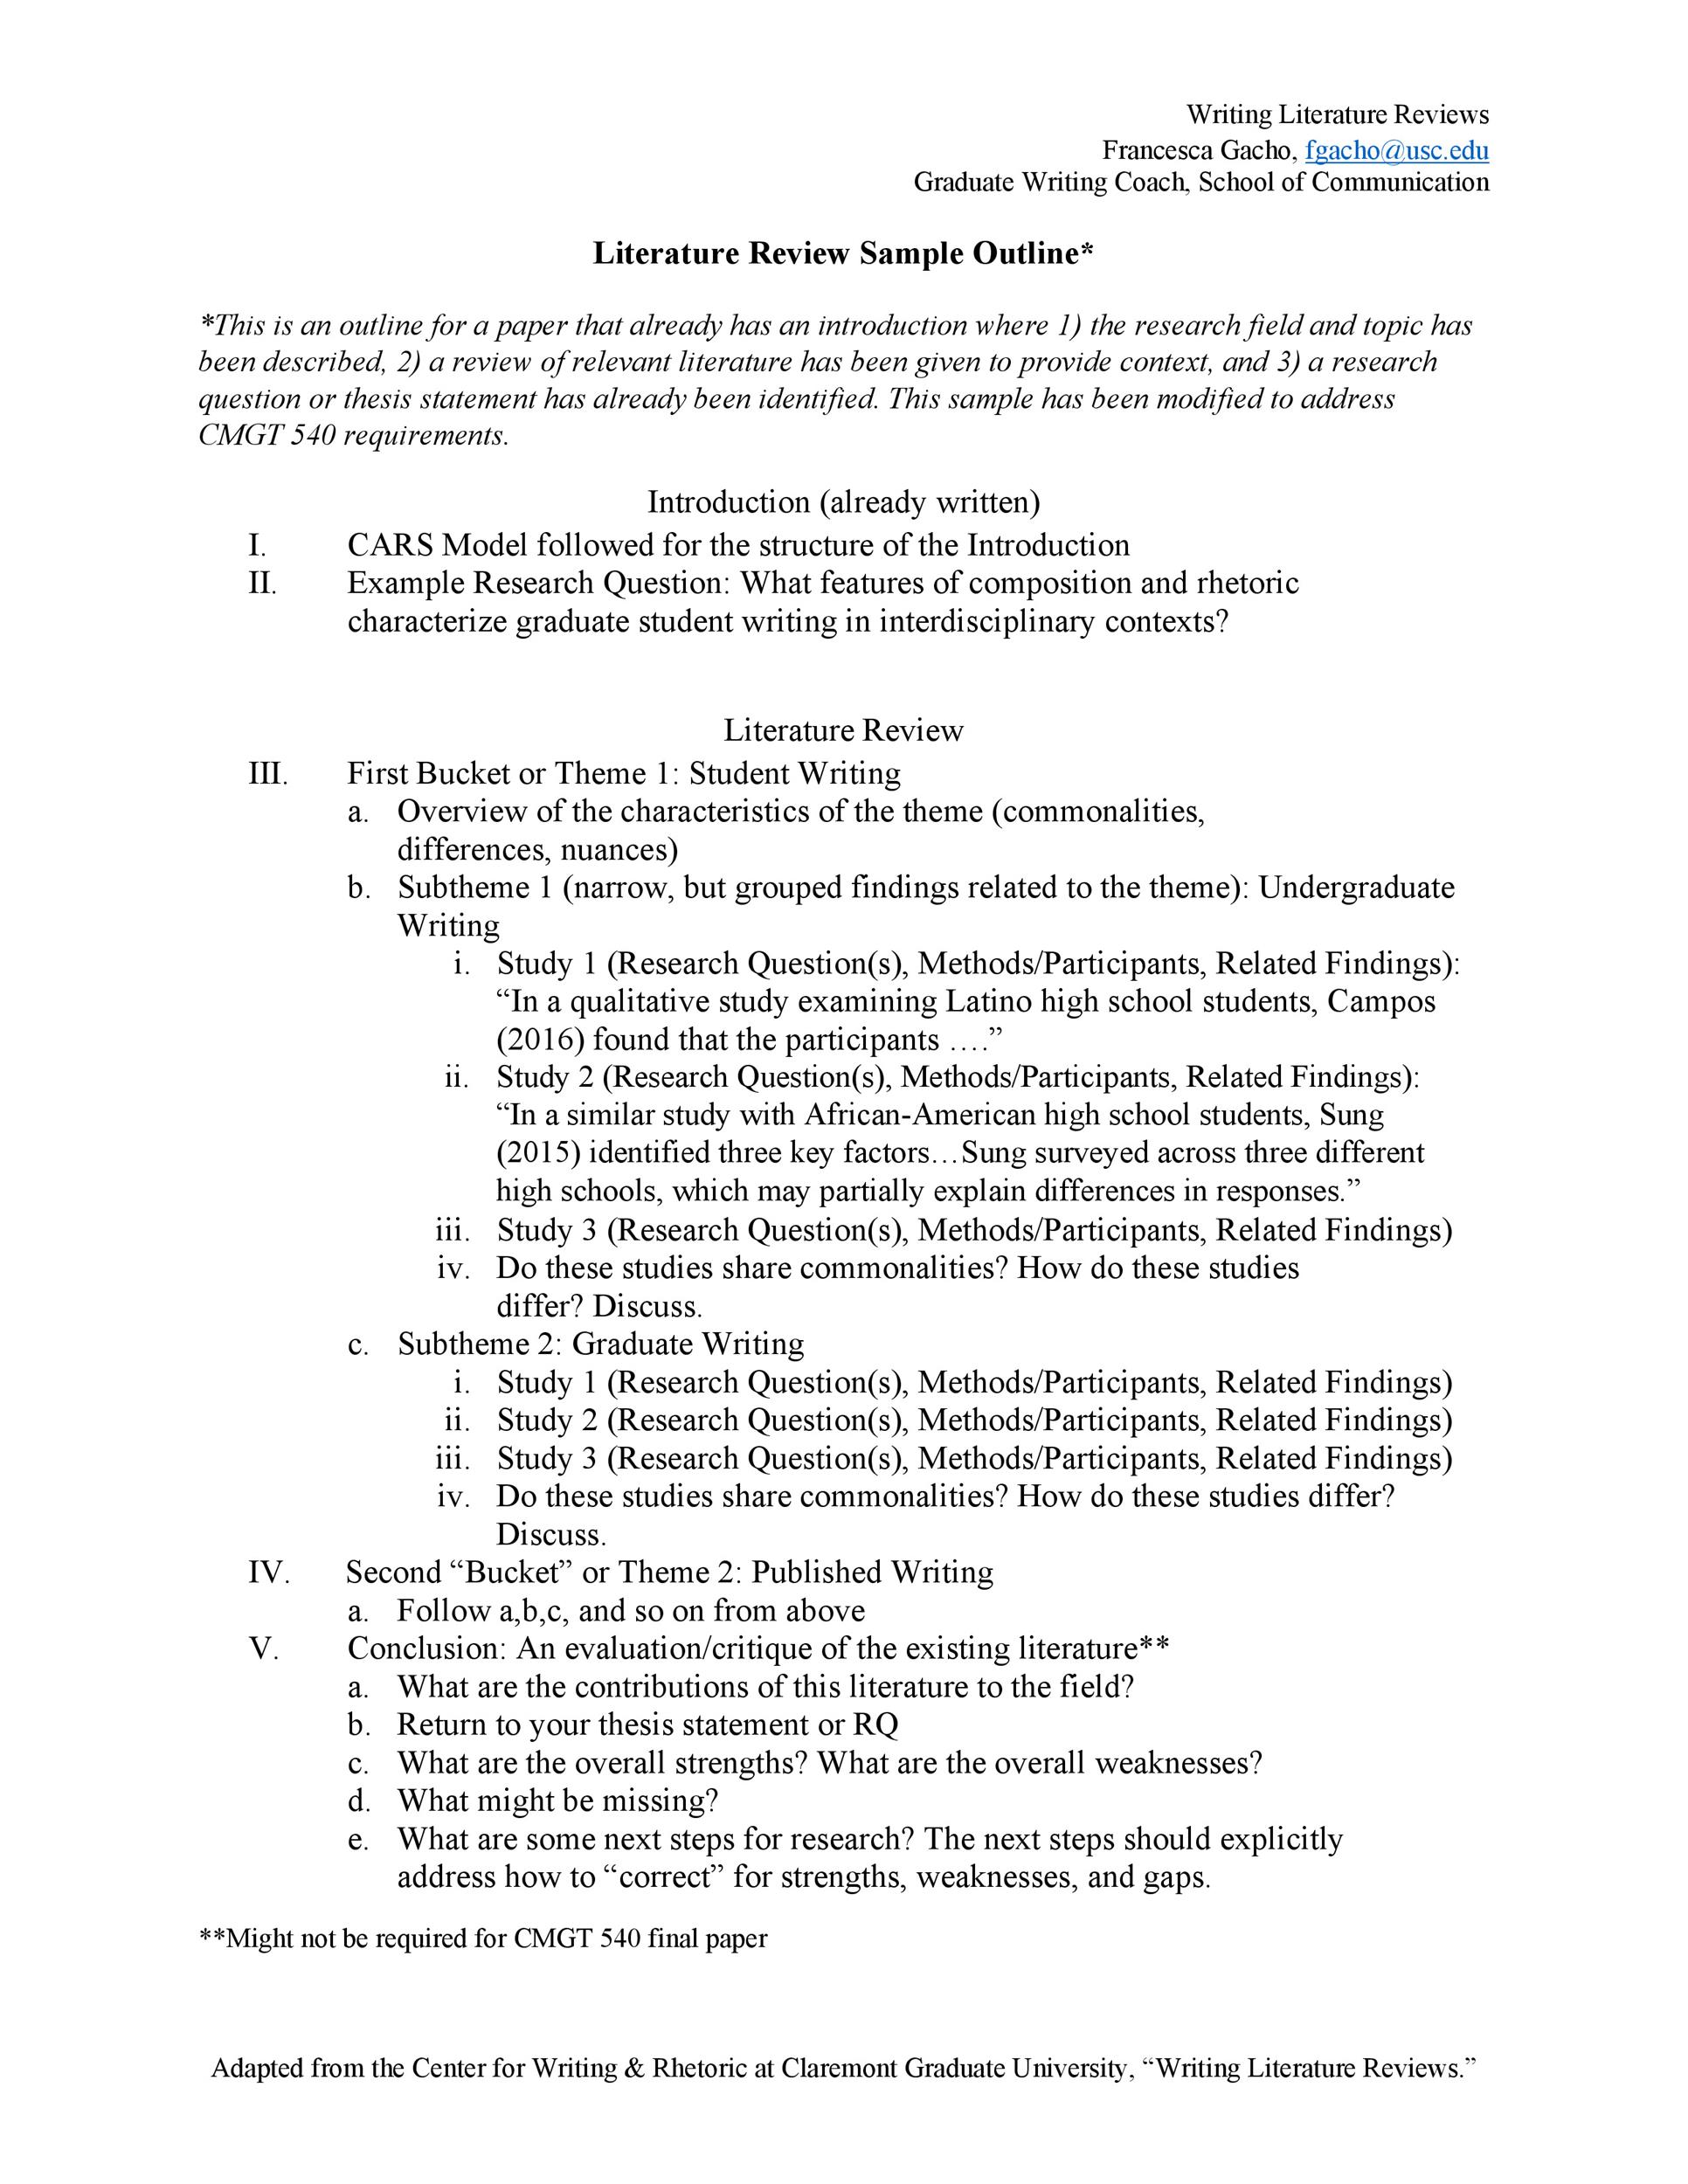 literature review assignment template